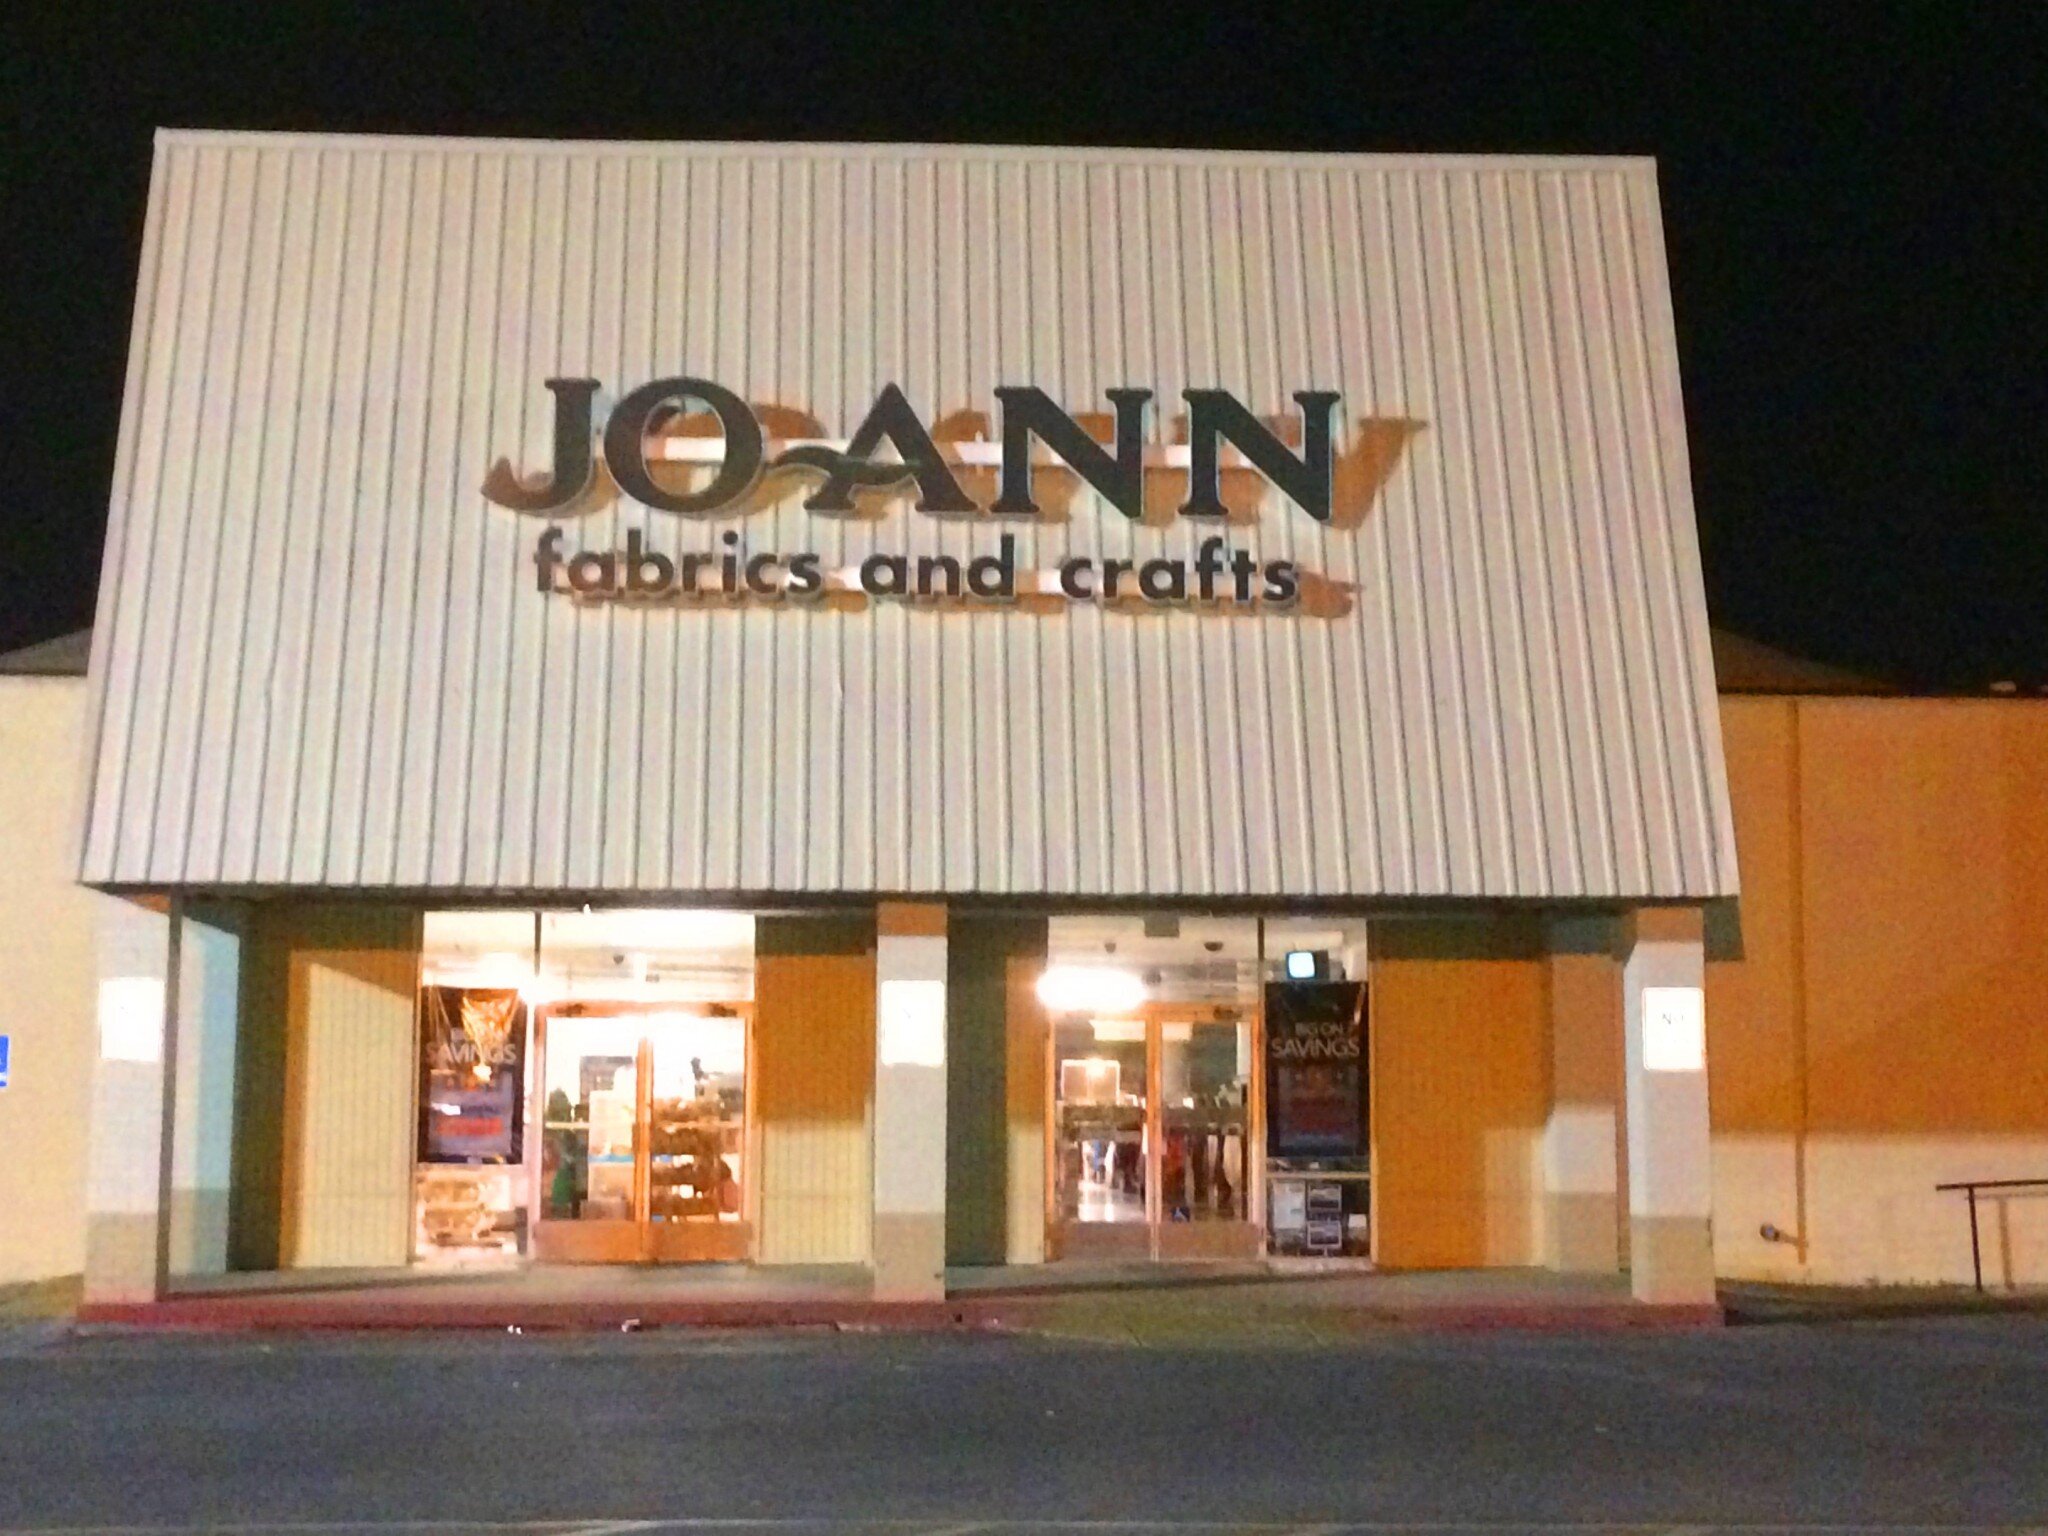 Joann Fabrics and Crafts Channel Letters at Night